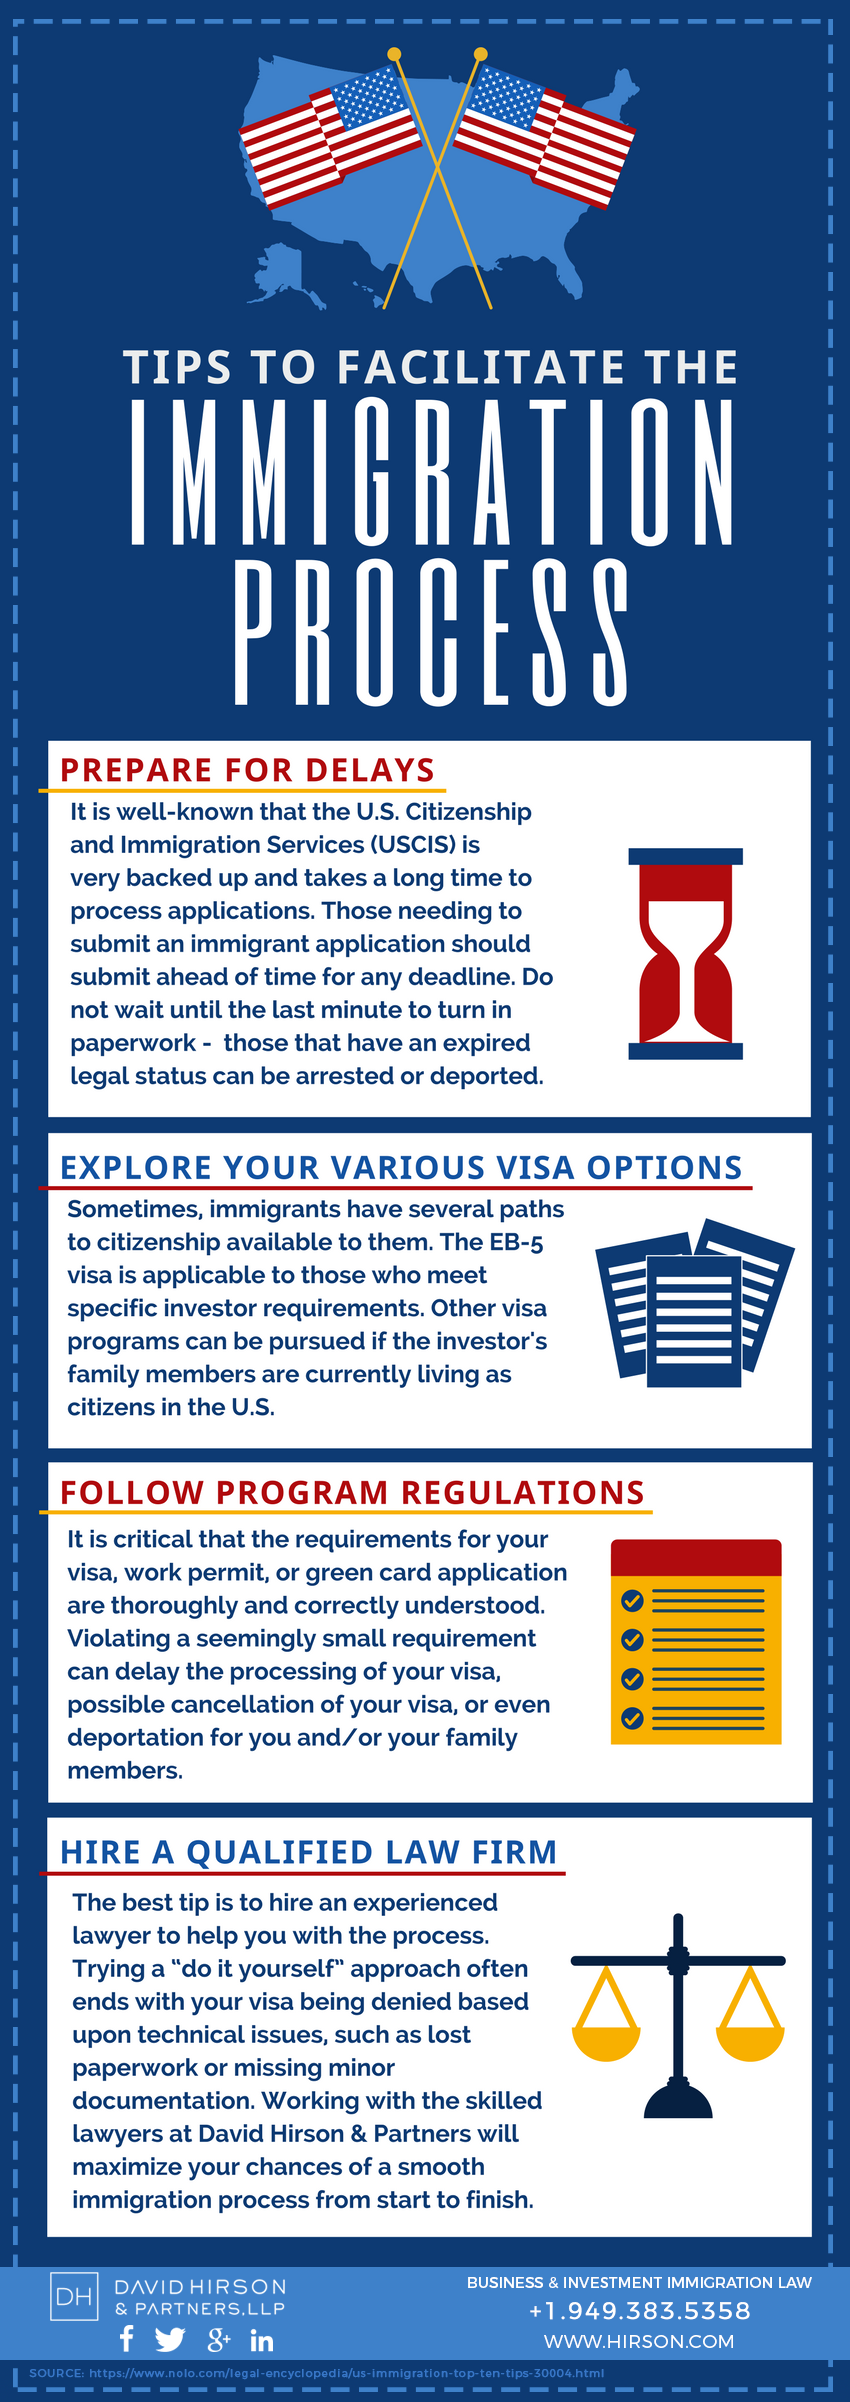 Tips to make the immigration process smoother